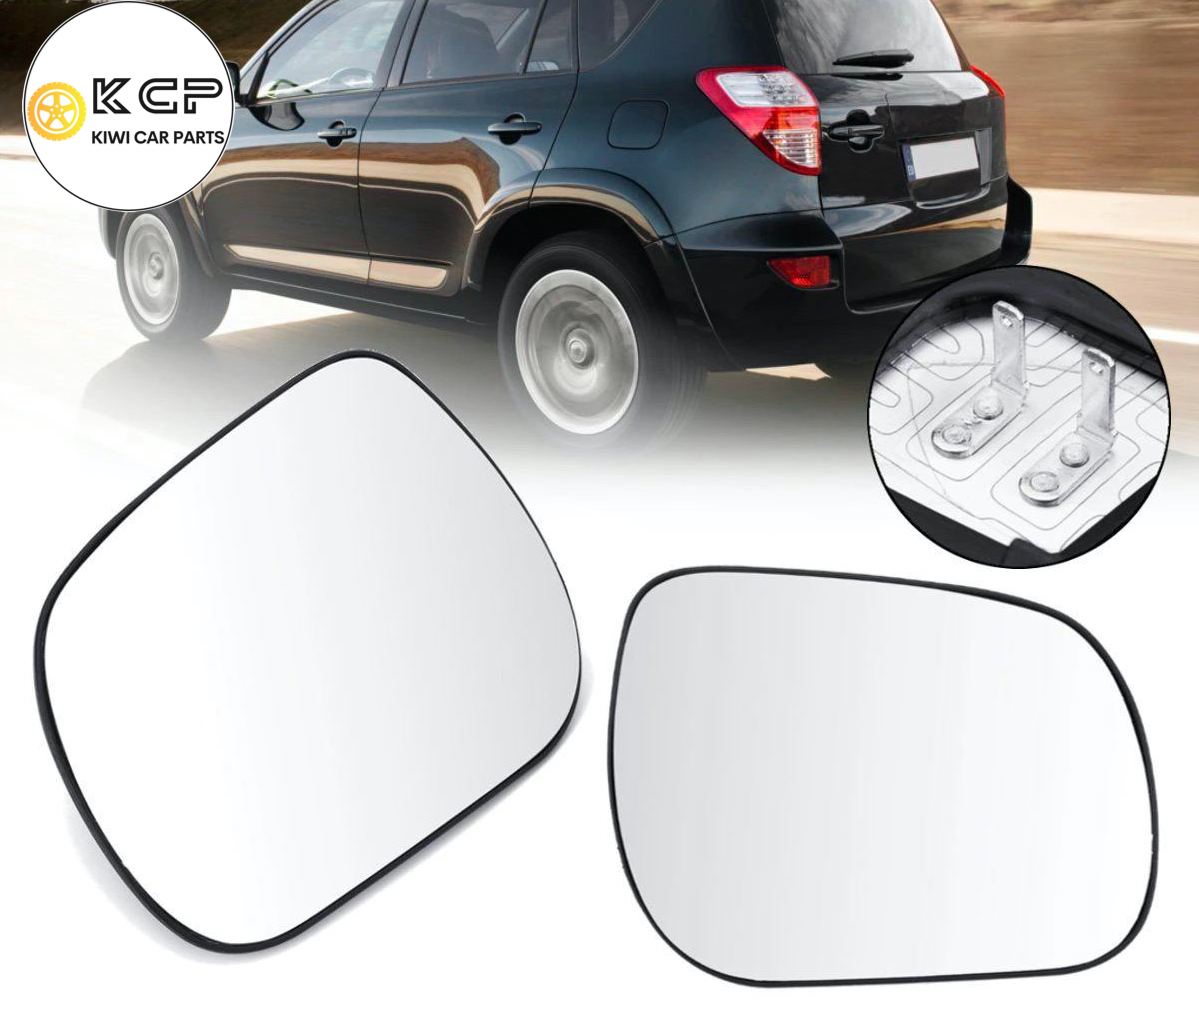 1PCS Front Left Rearview Side Mirror Glass suits for TOYOTA RAV4 2006 2007 2008 2009 2010 2011 2012